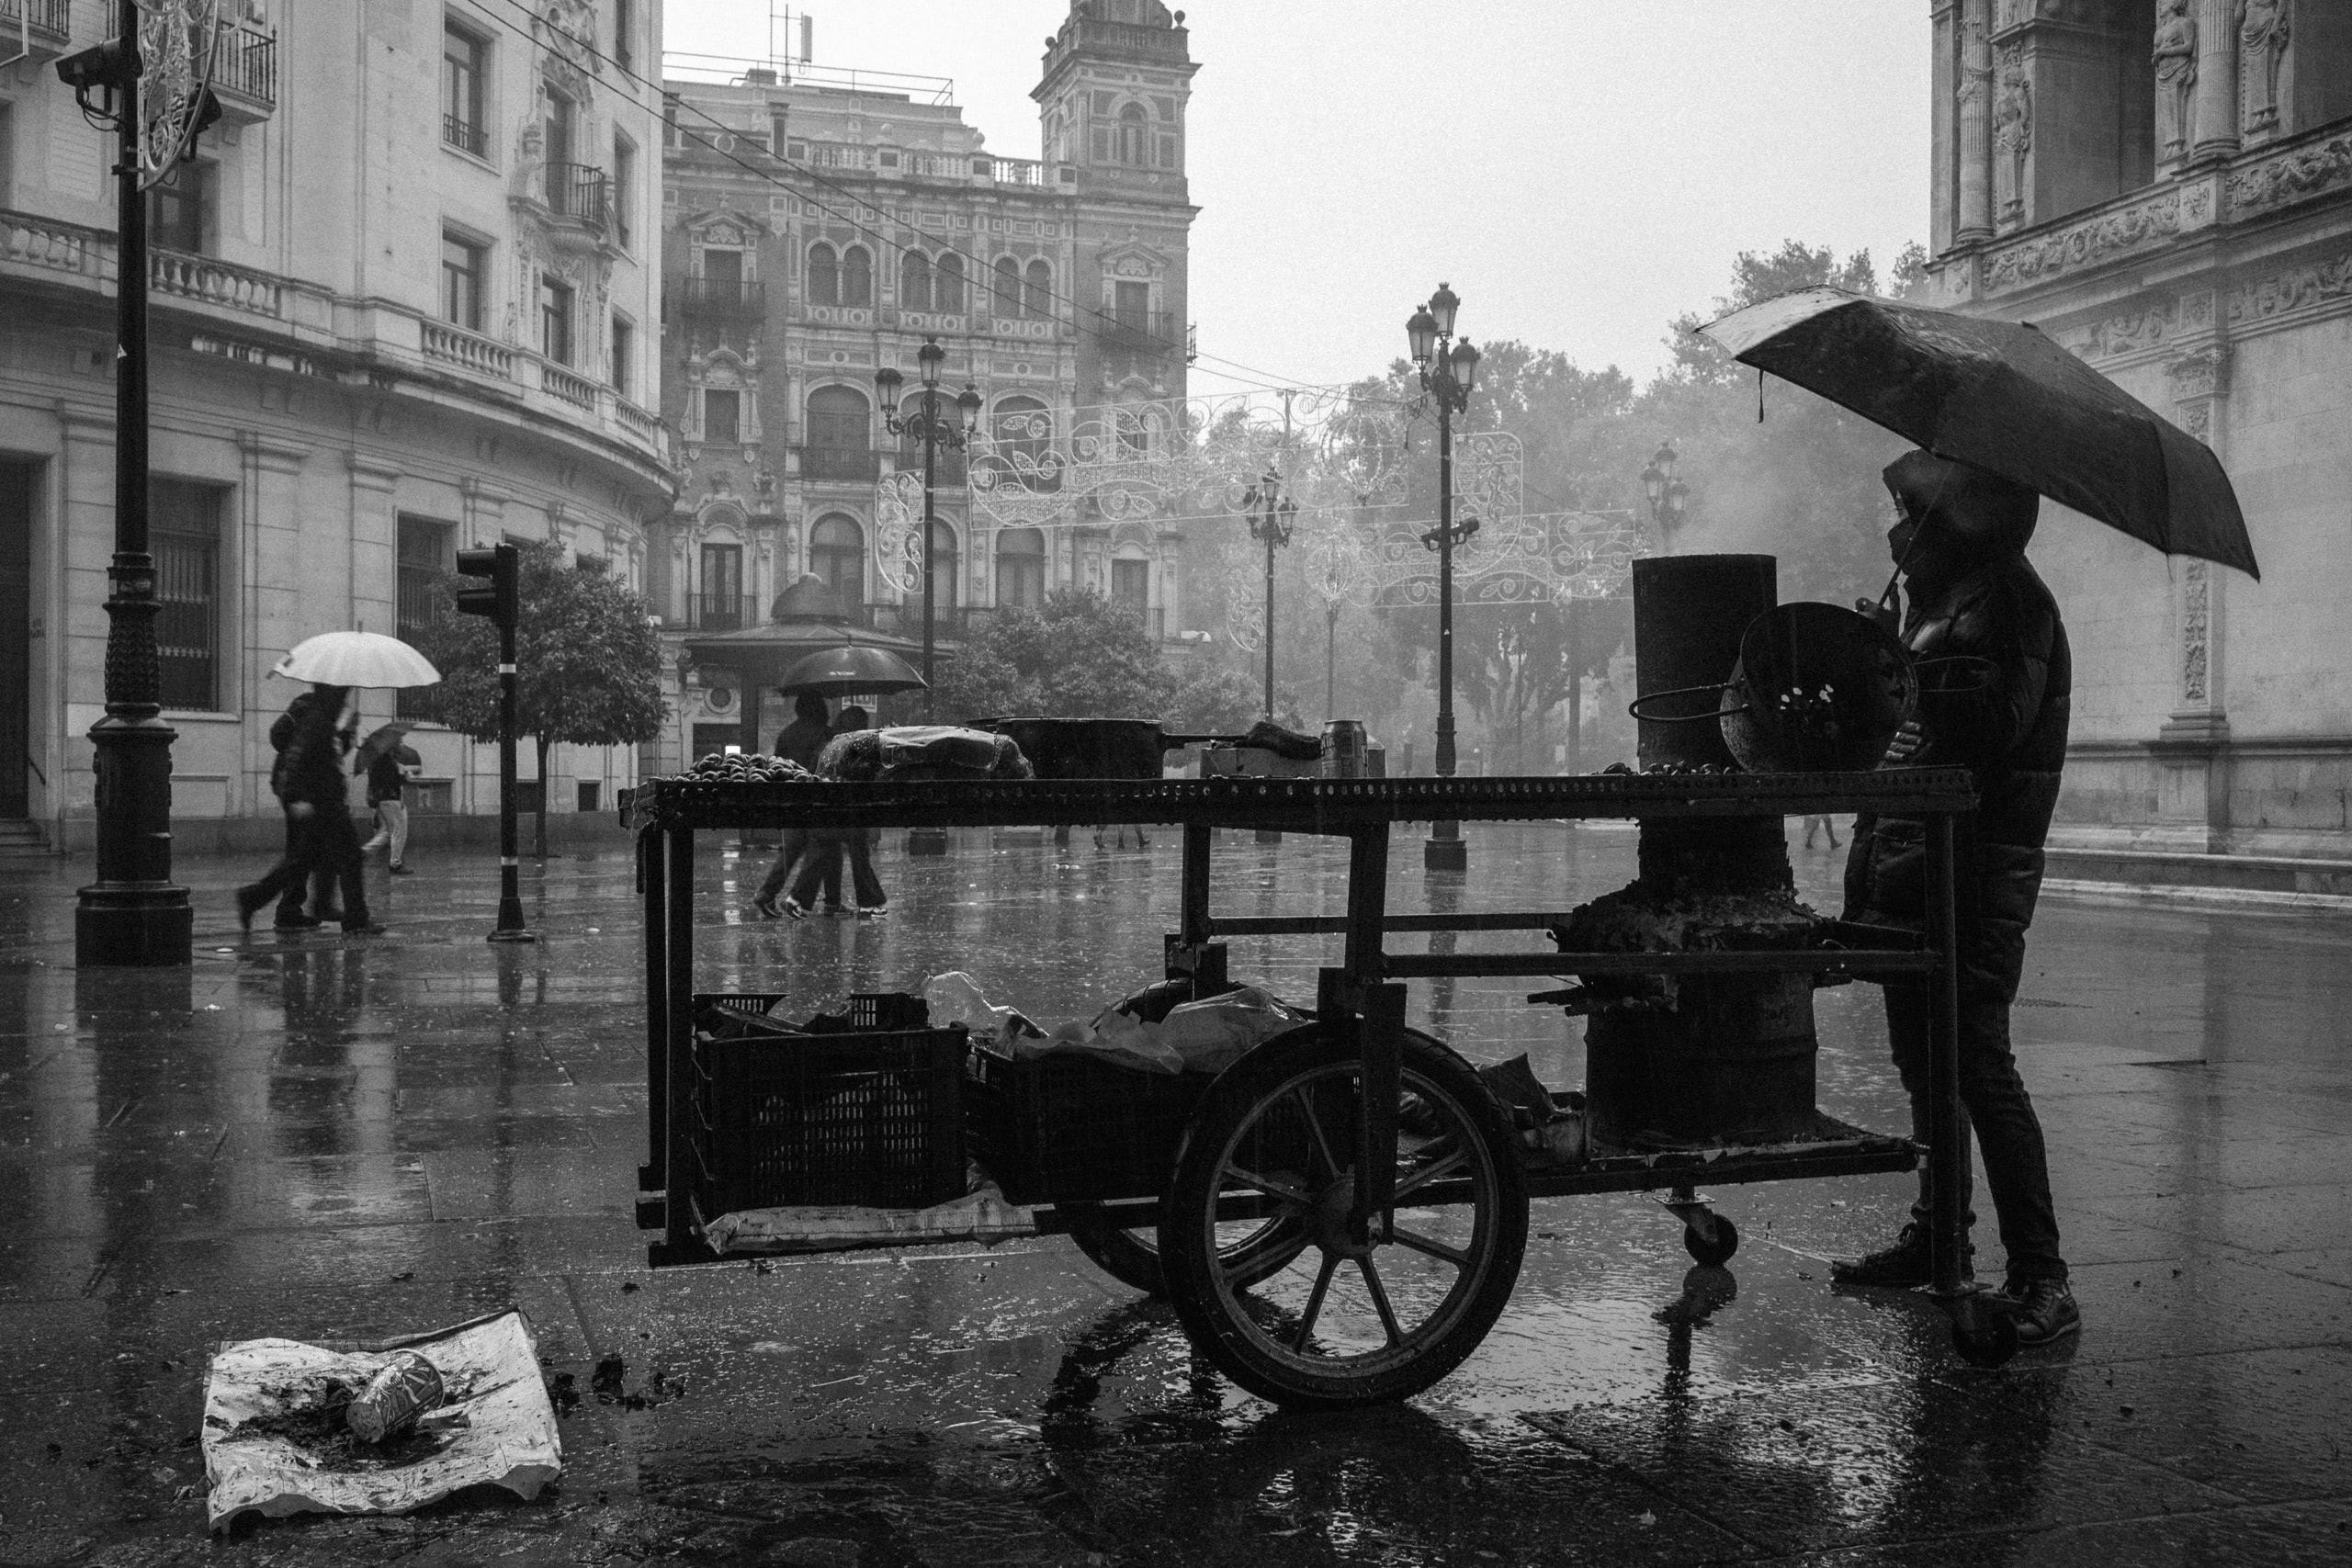 A shop vendor under an umbrella by his cart in the middle of the street